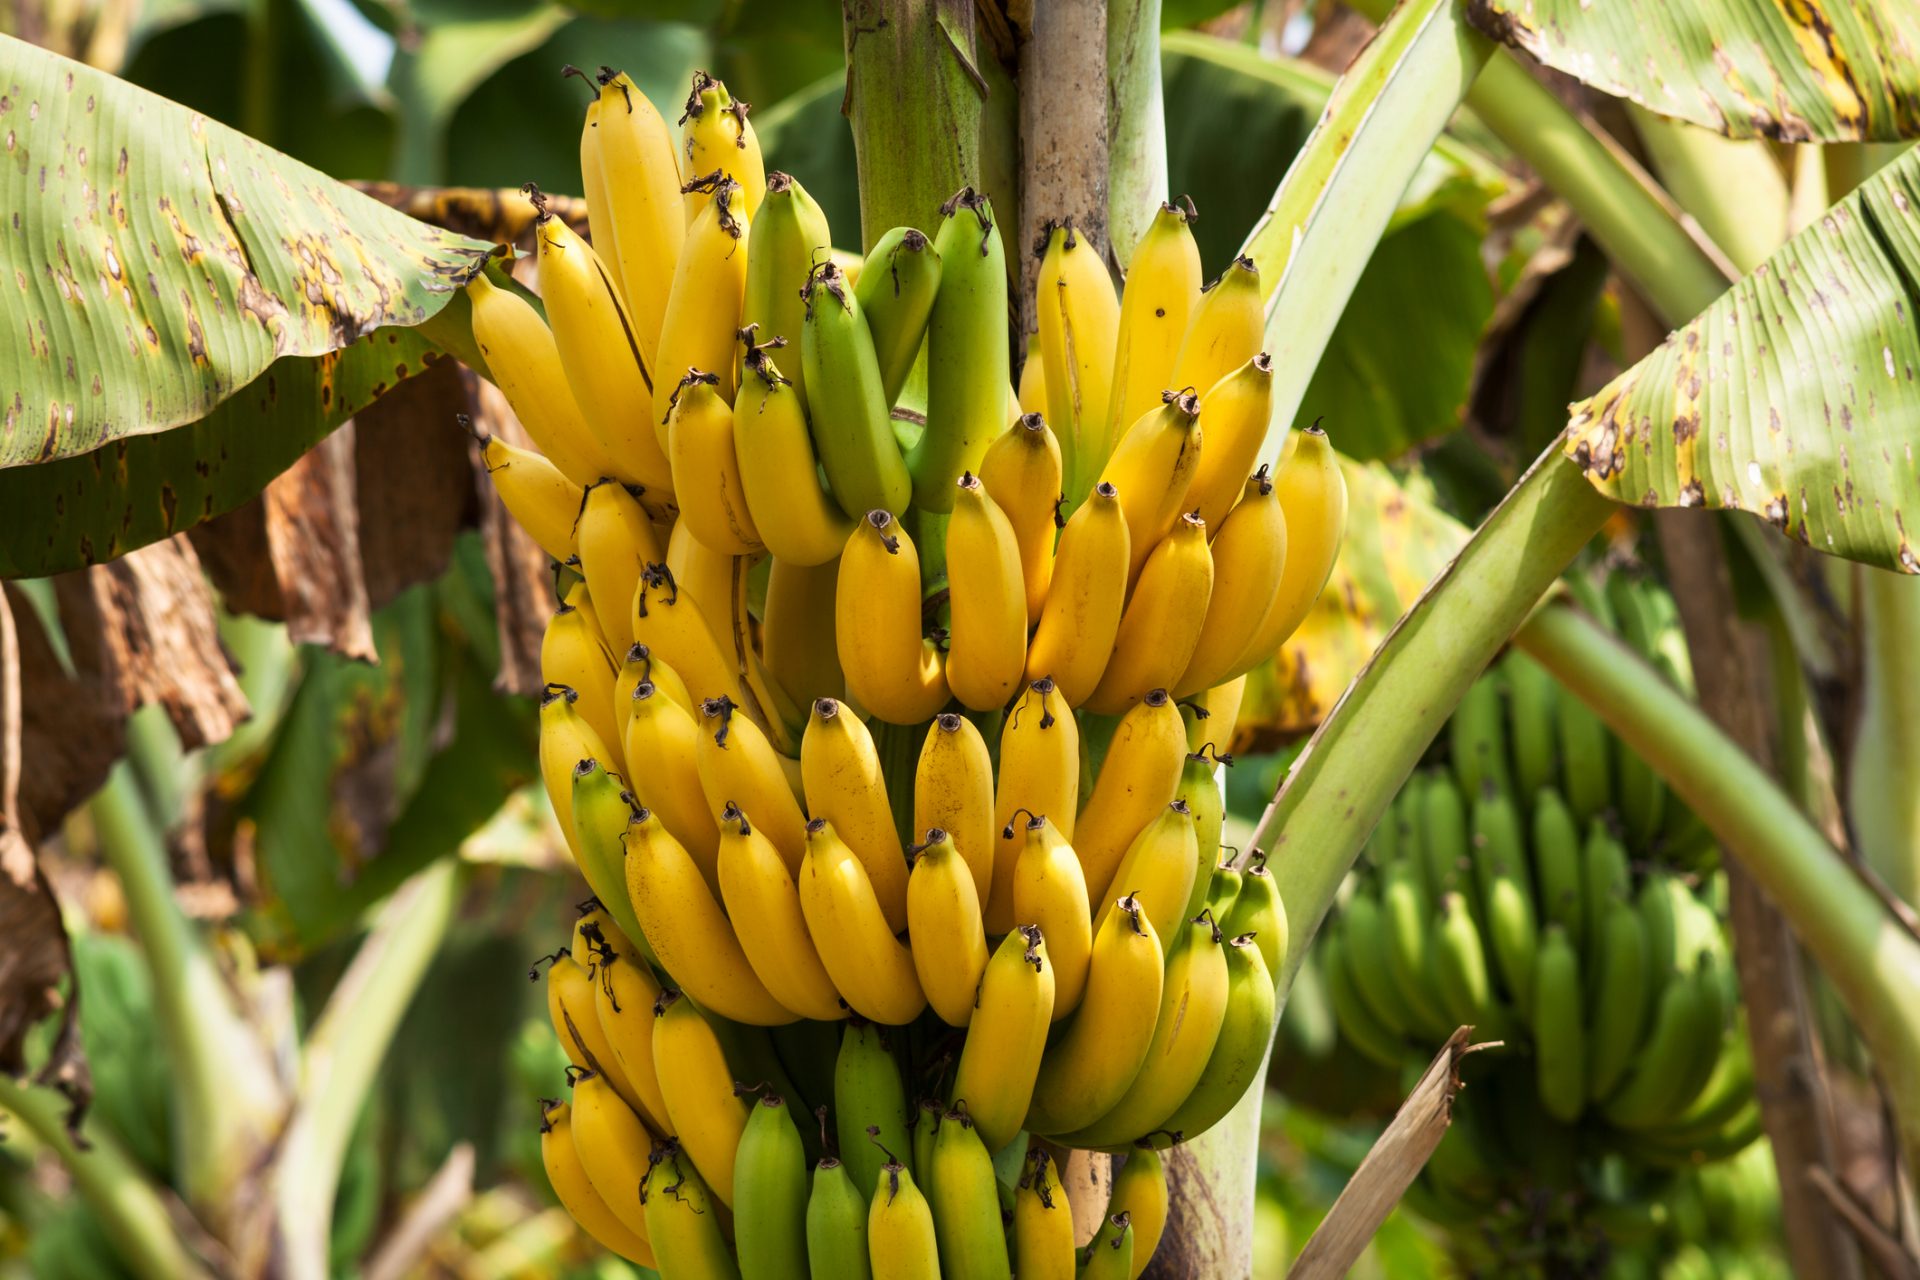 Scientists use dried banana peel to generate hydrogen